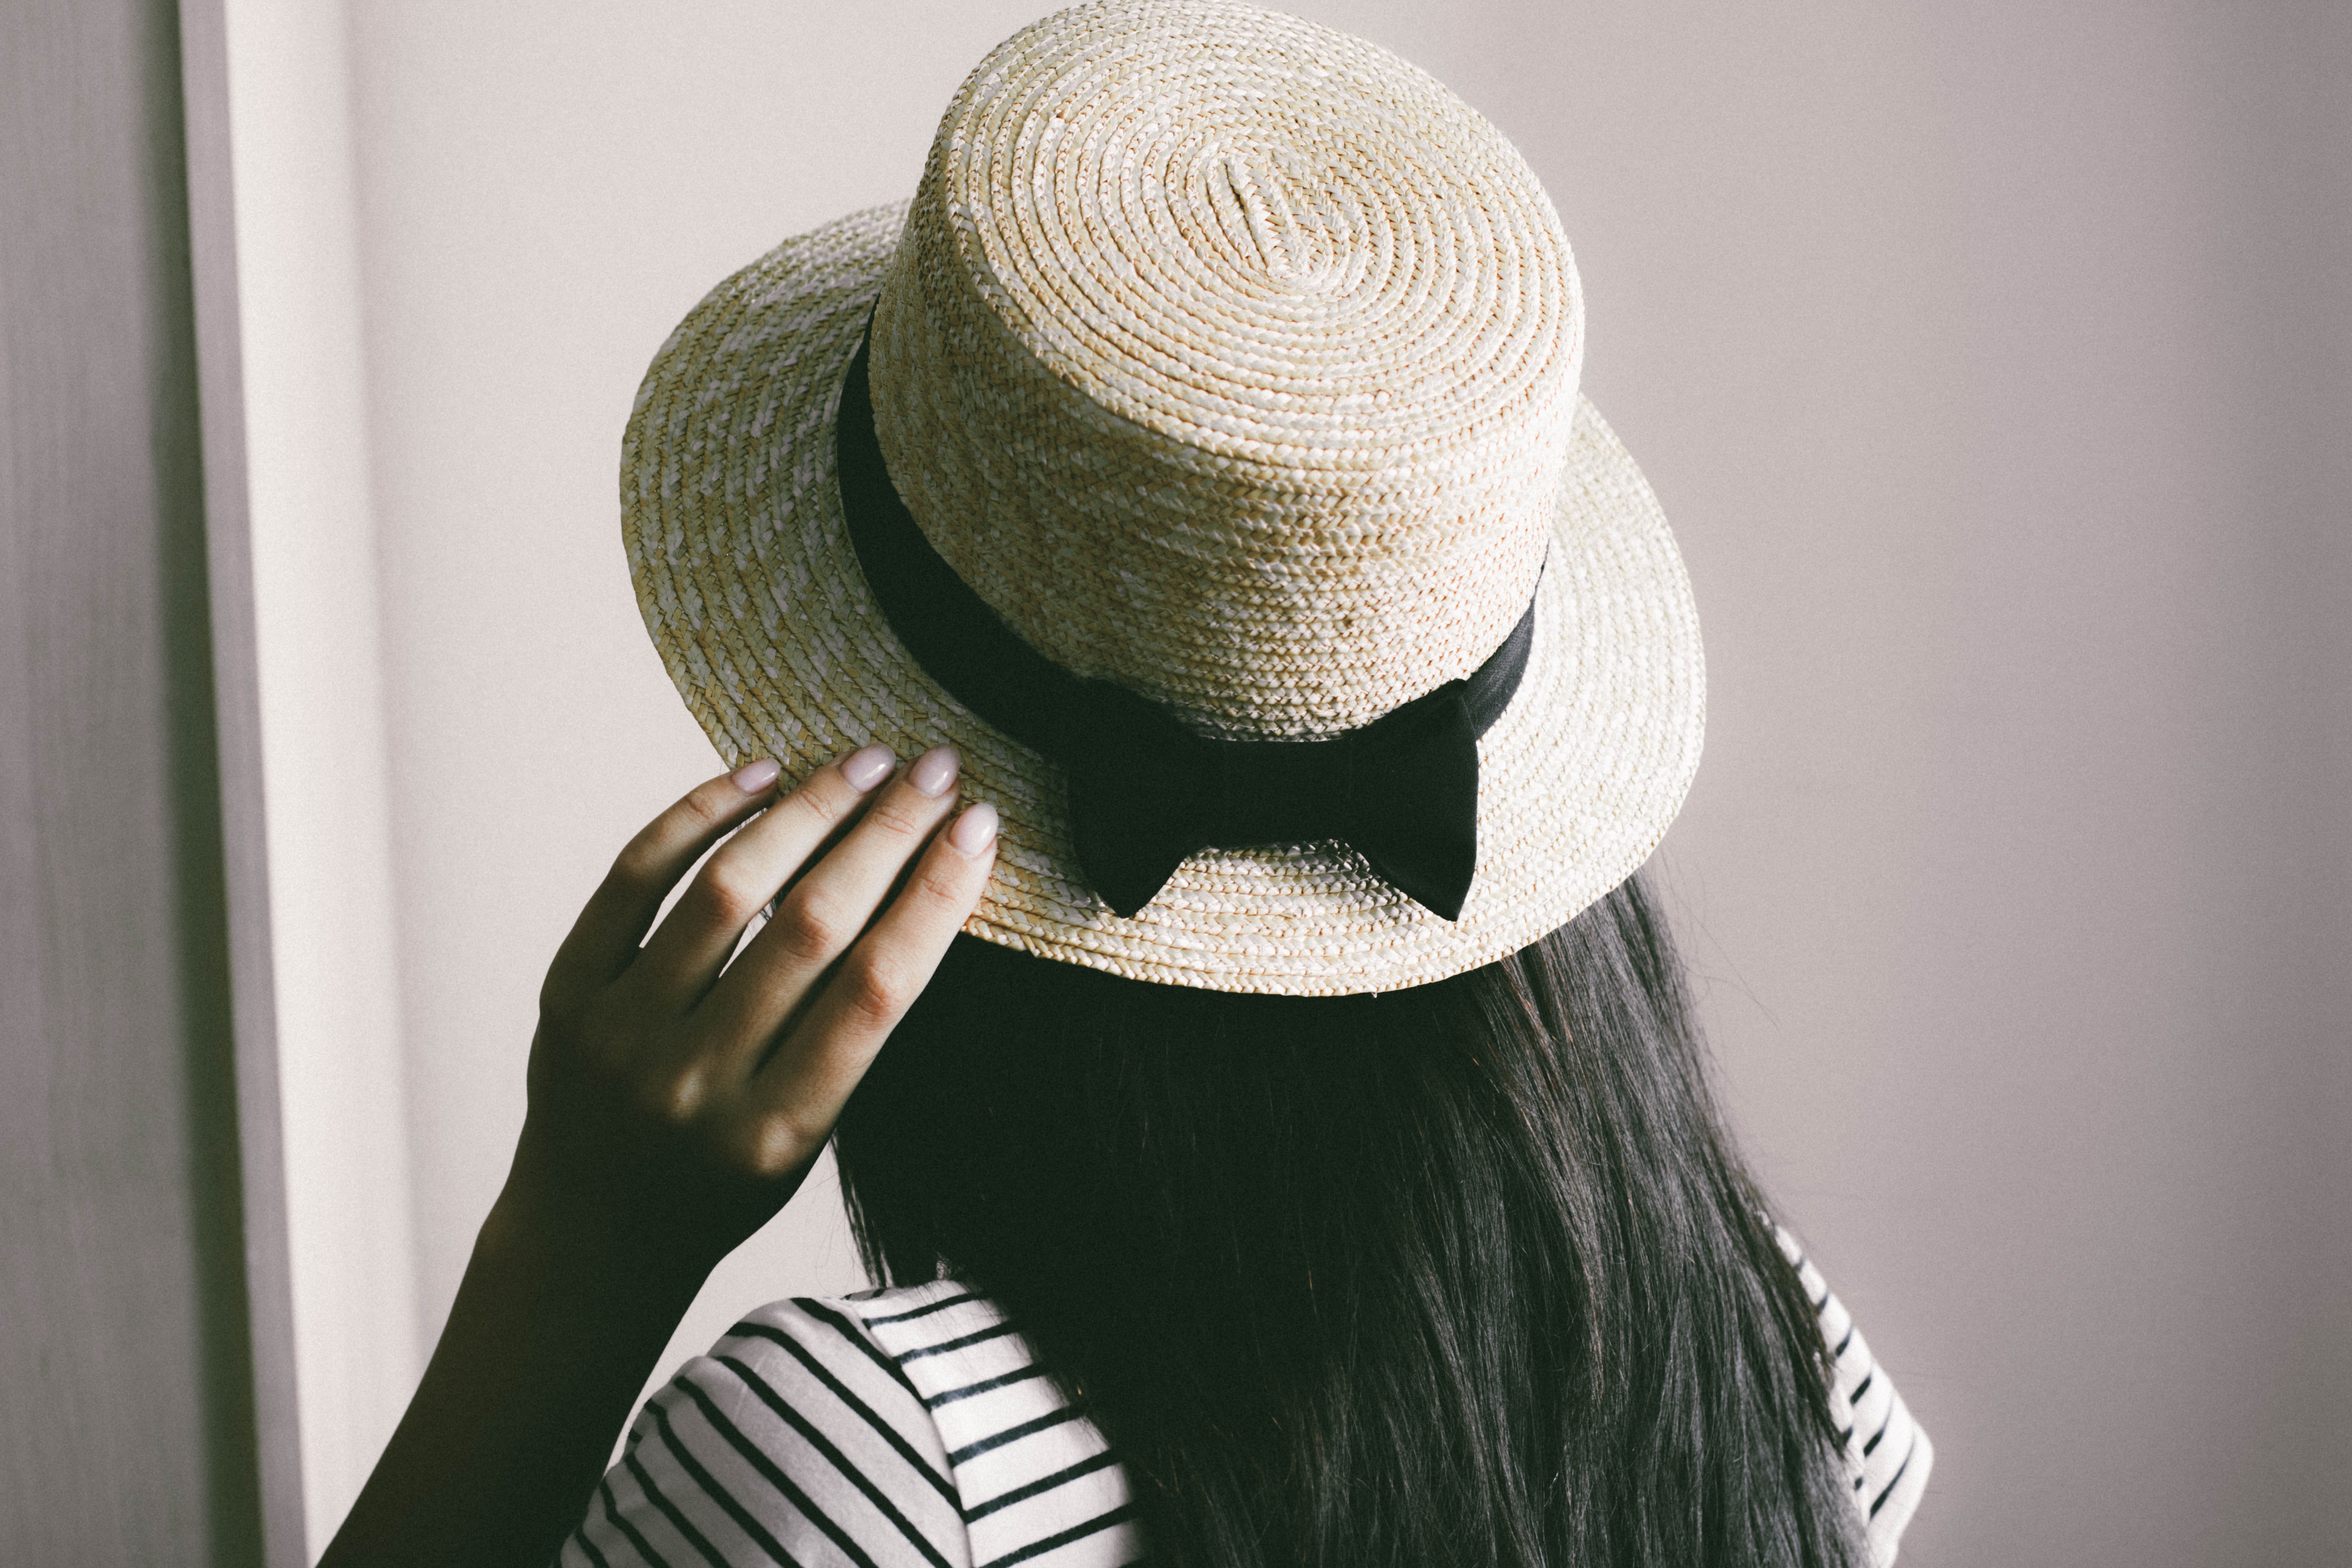 A woman holding a brown straw hat on her head